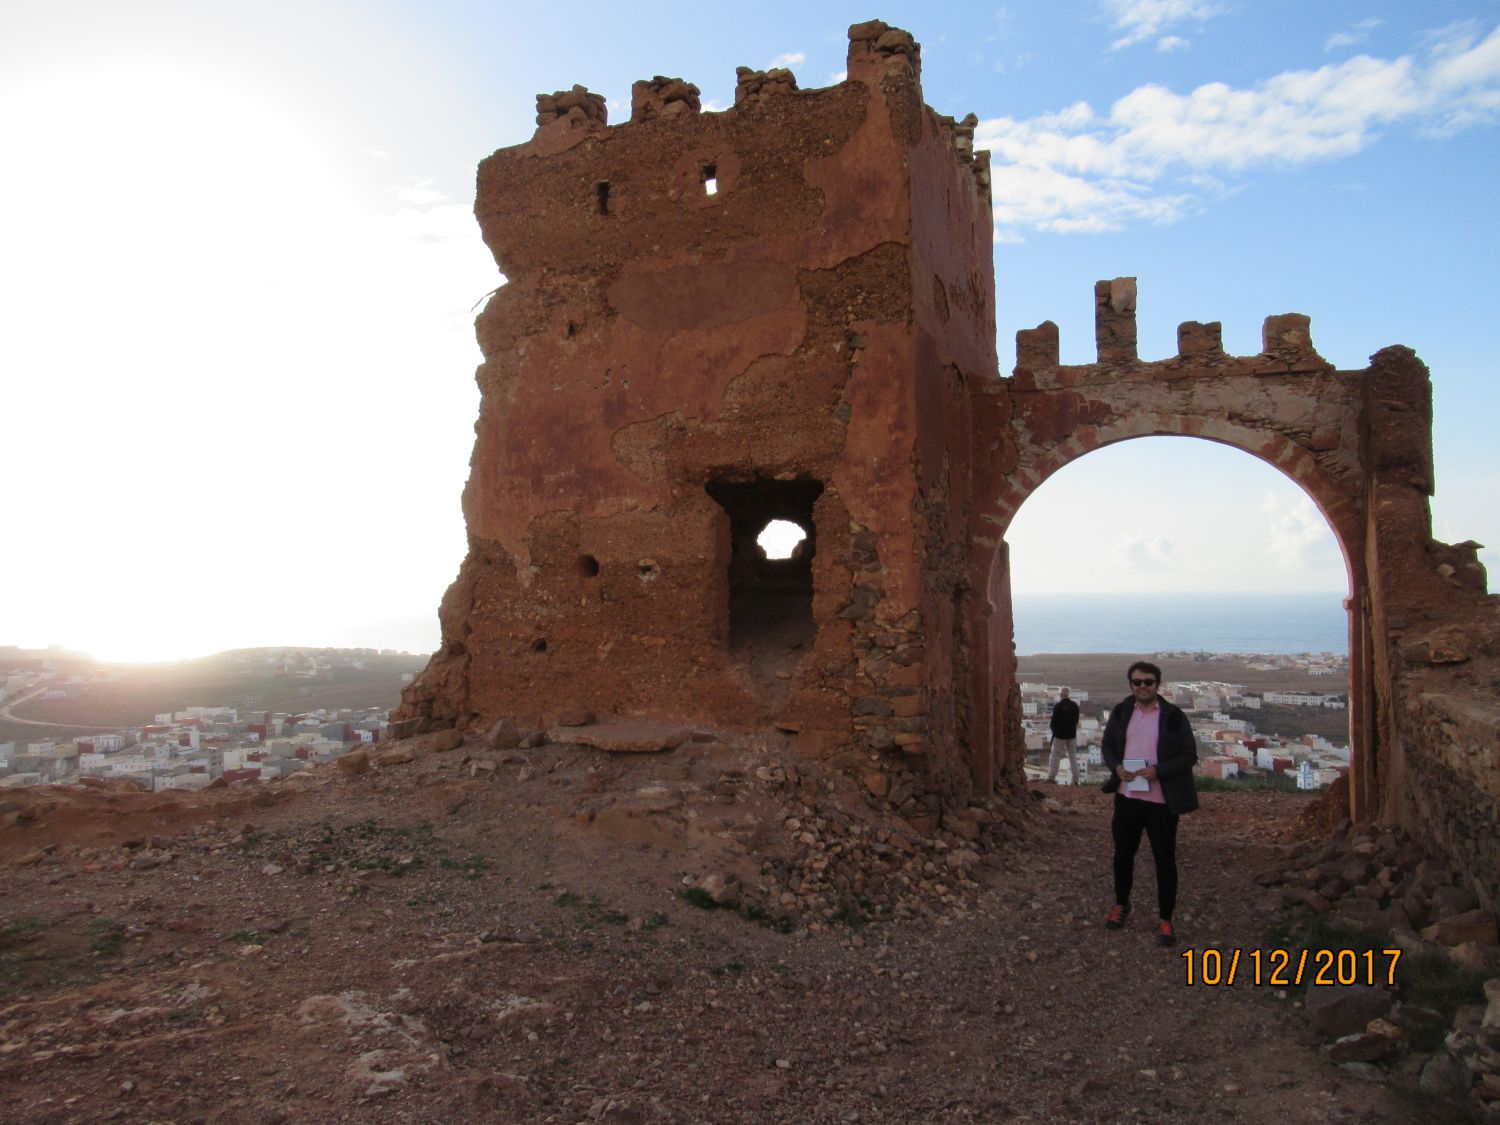 Agadir of Mirleft - View of city from gate.